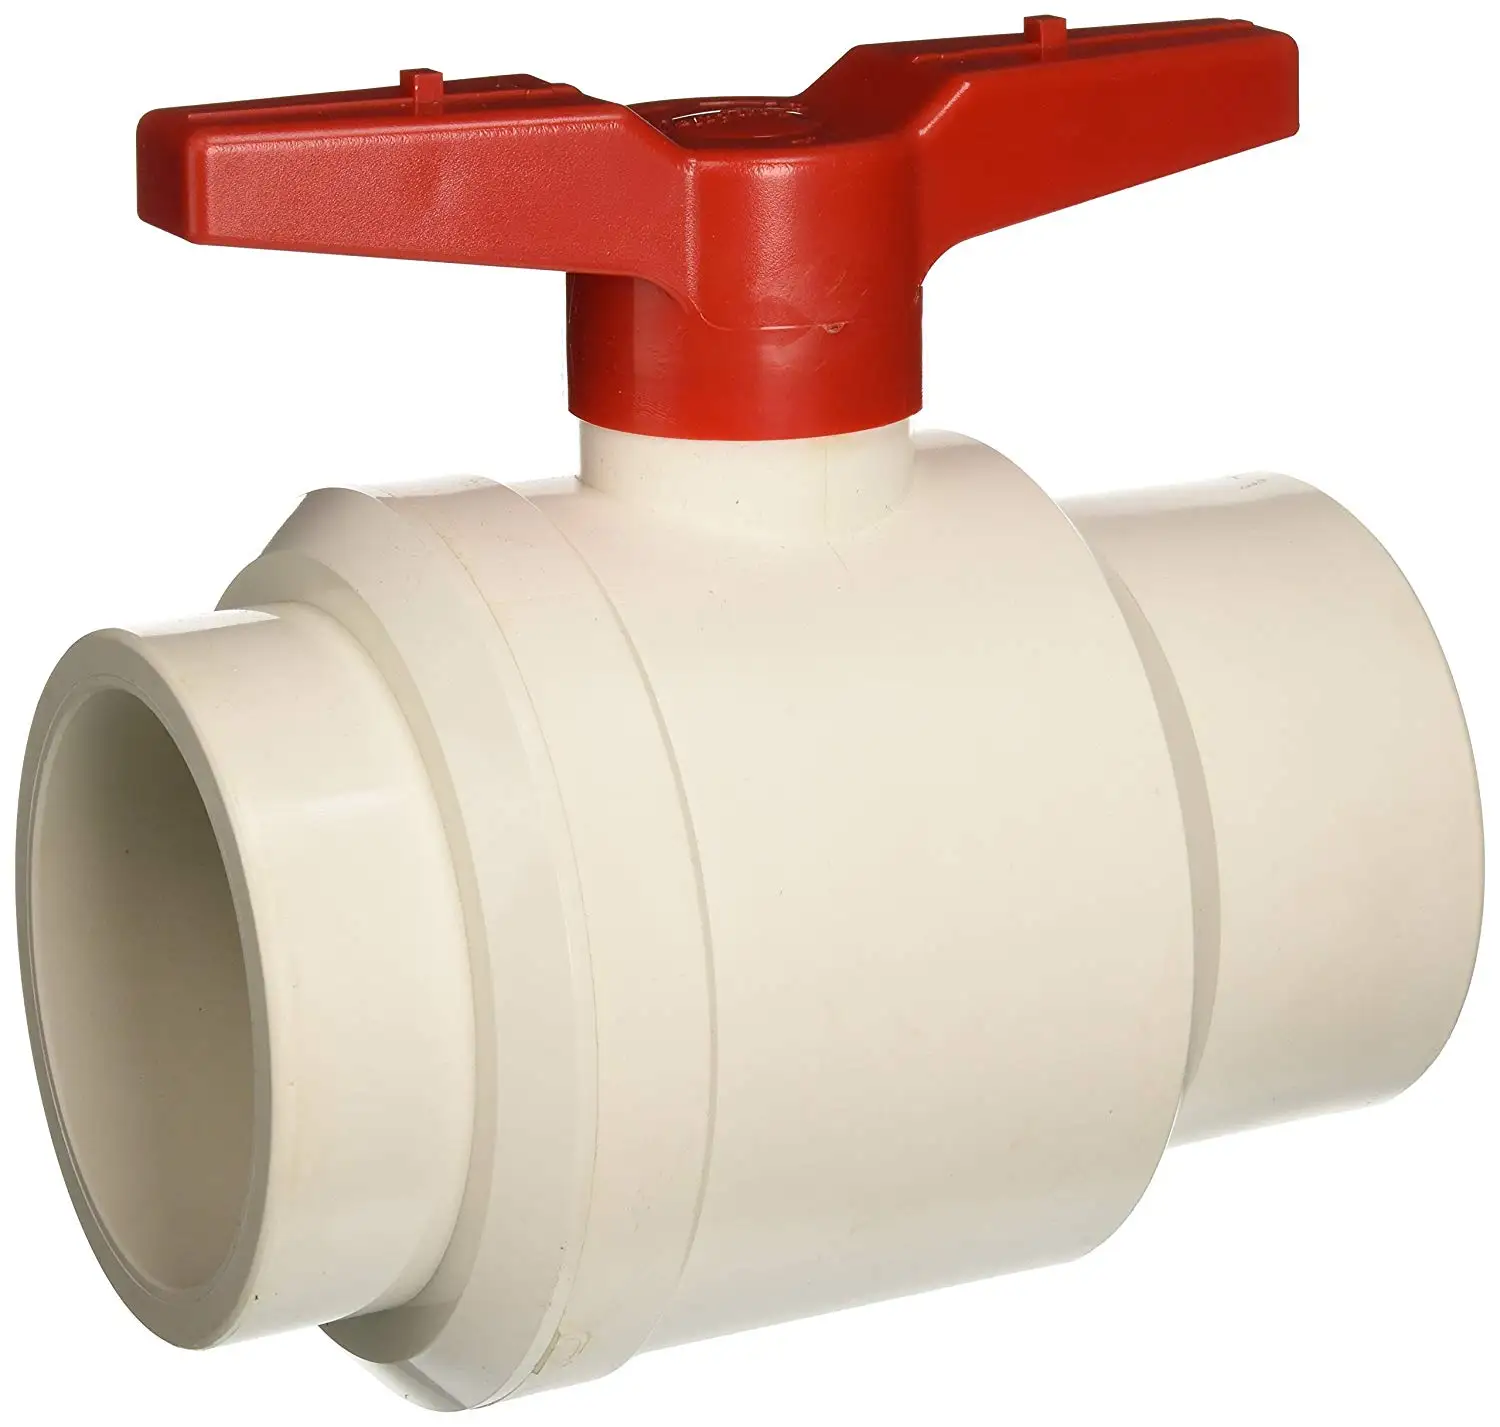 Cheap 4 Inch Ball Valve, find 4 Inch Ball Valve deals on line at